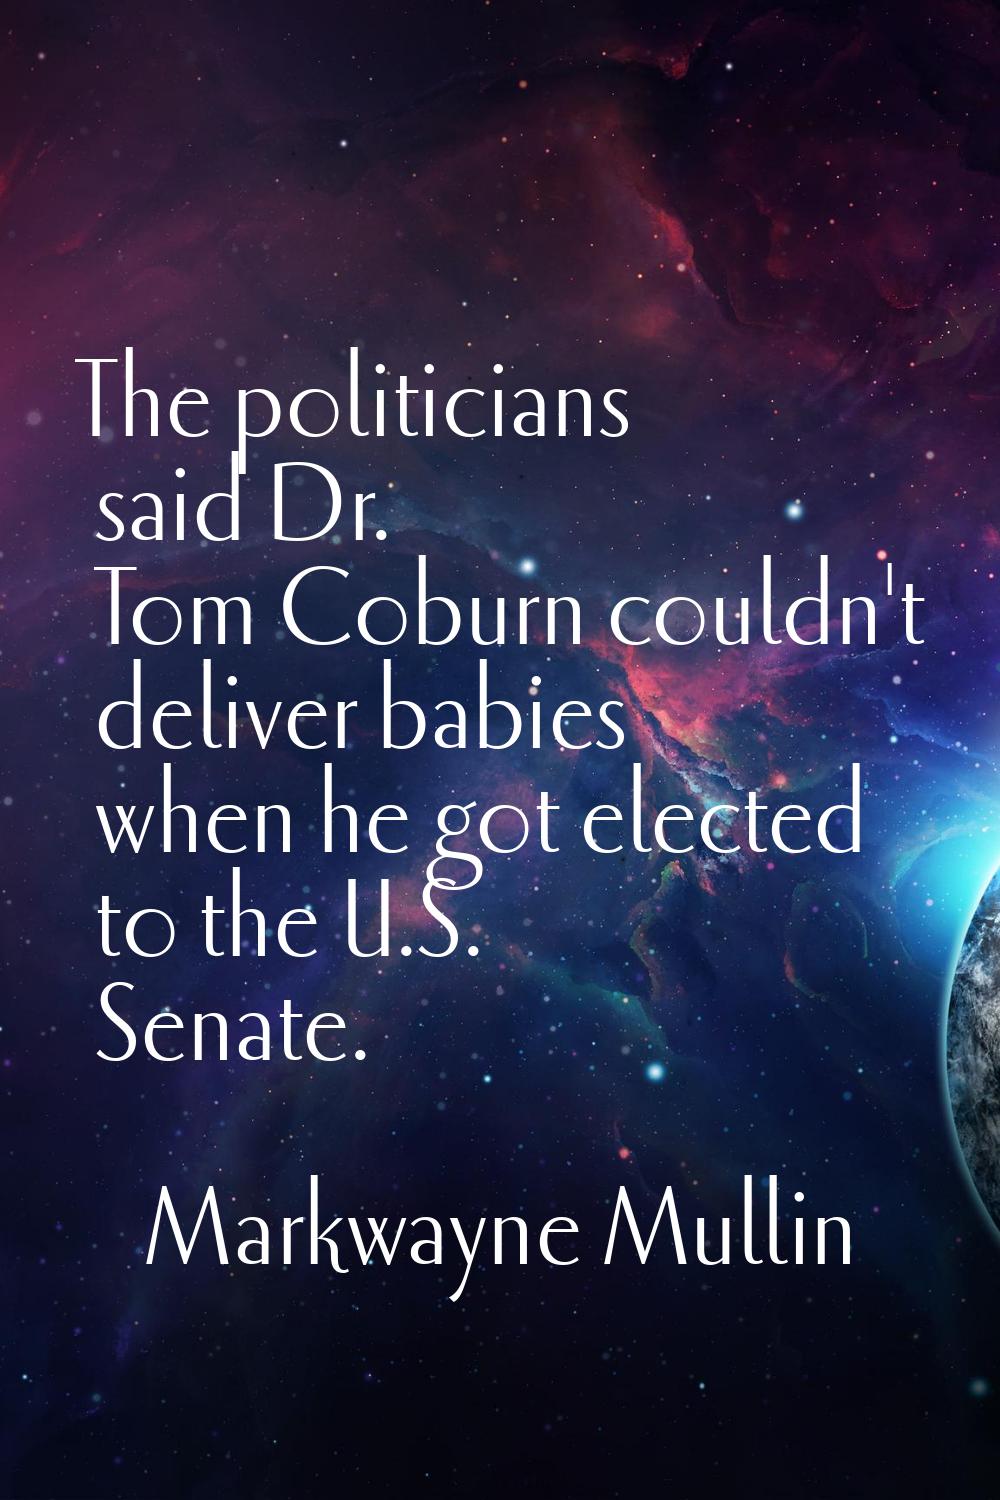 The politicians said Dr. Tom Coburn couldn't deliver babies when he got elected to the U.S. Senate.